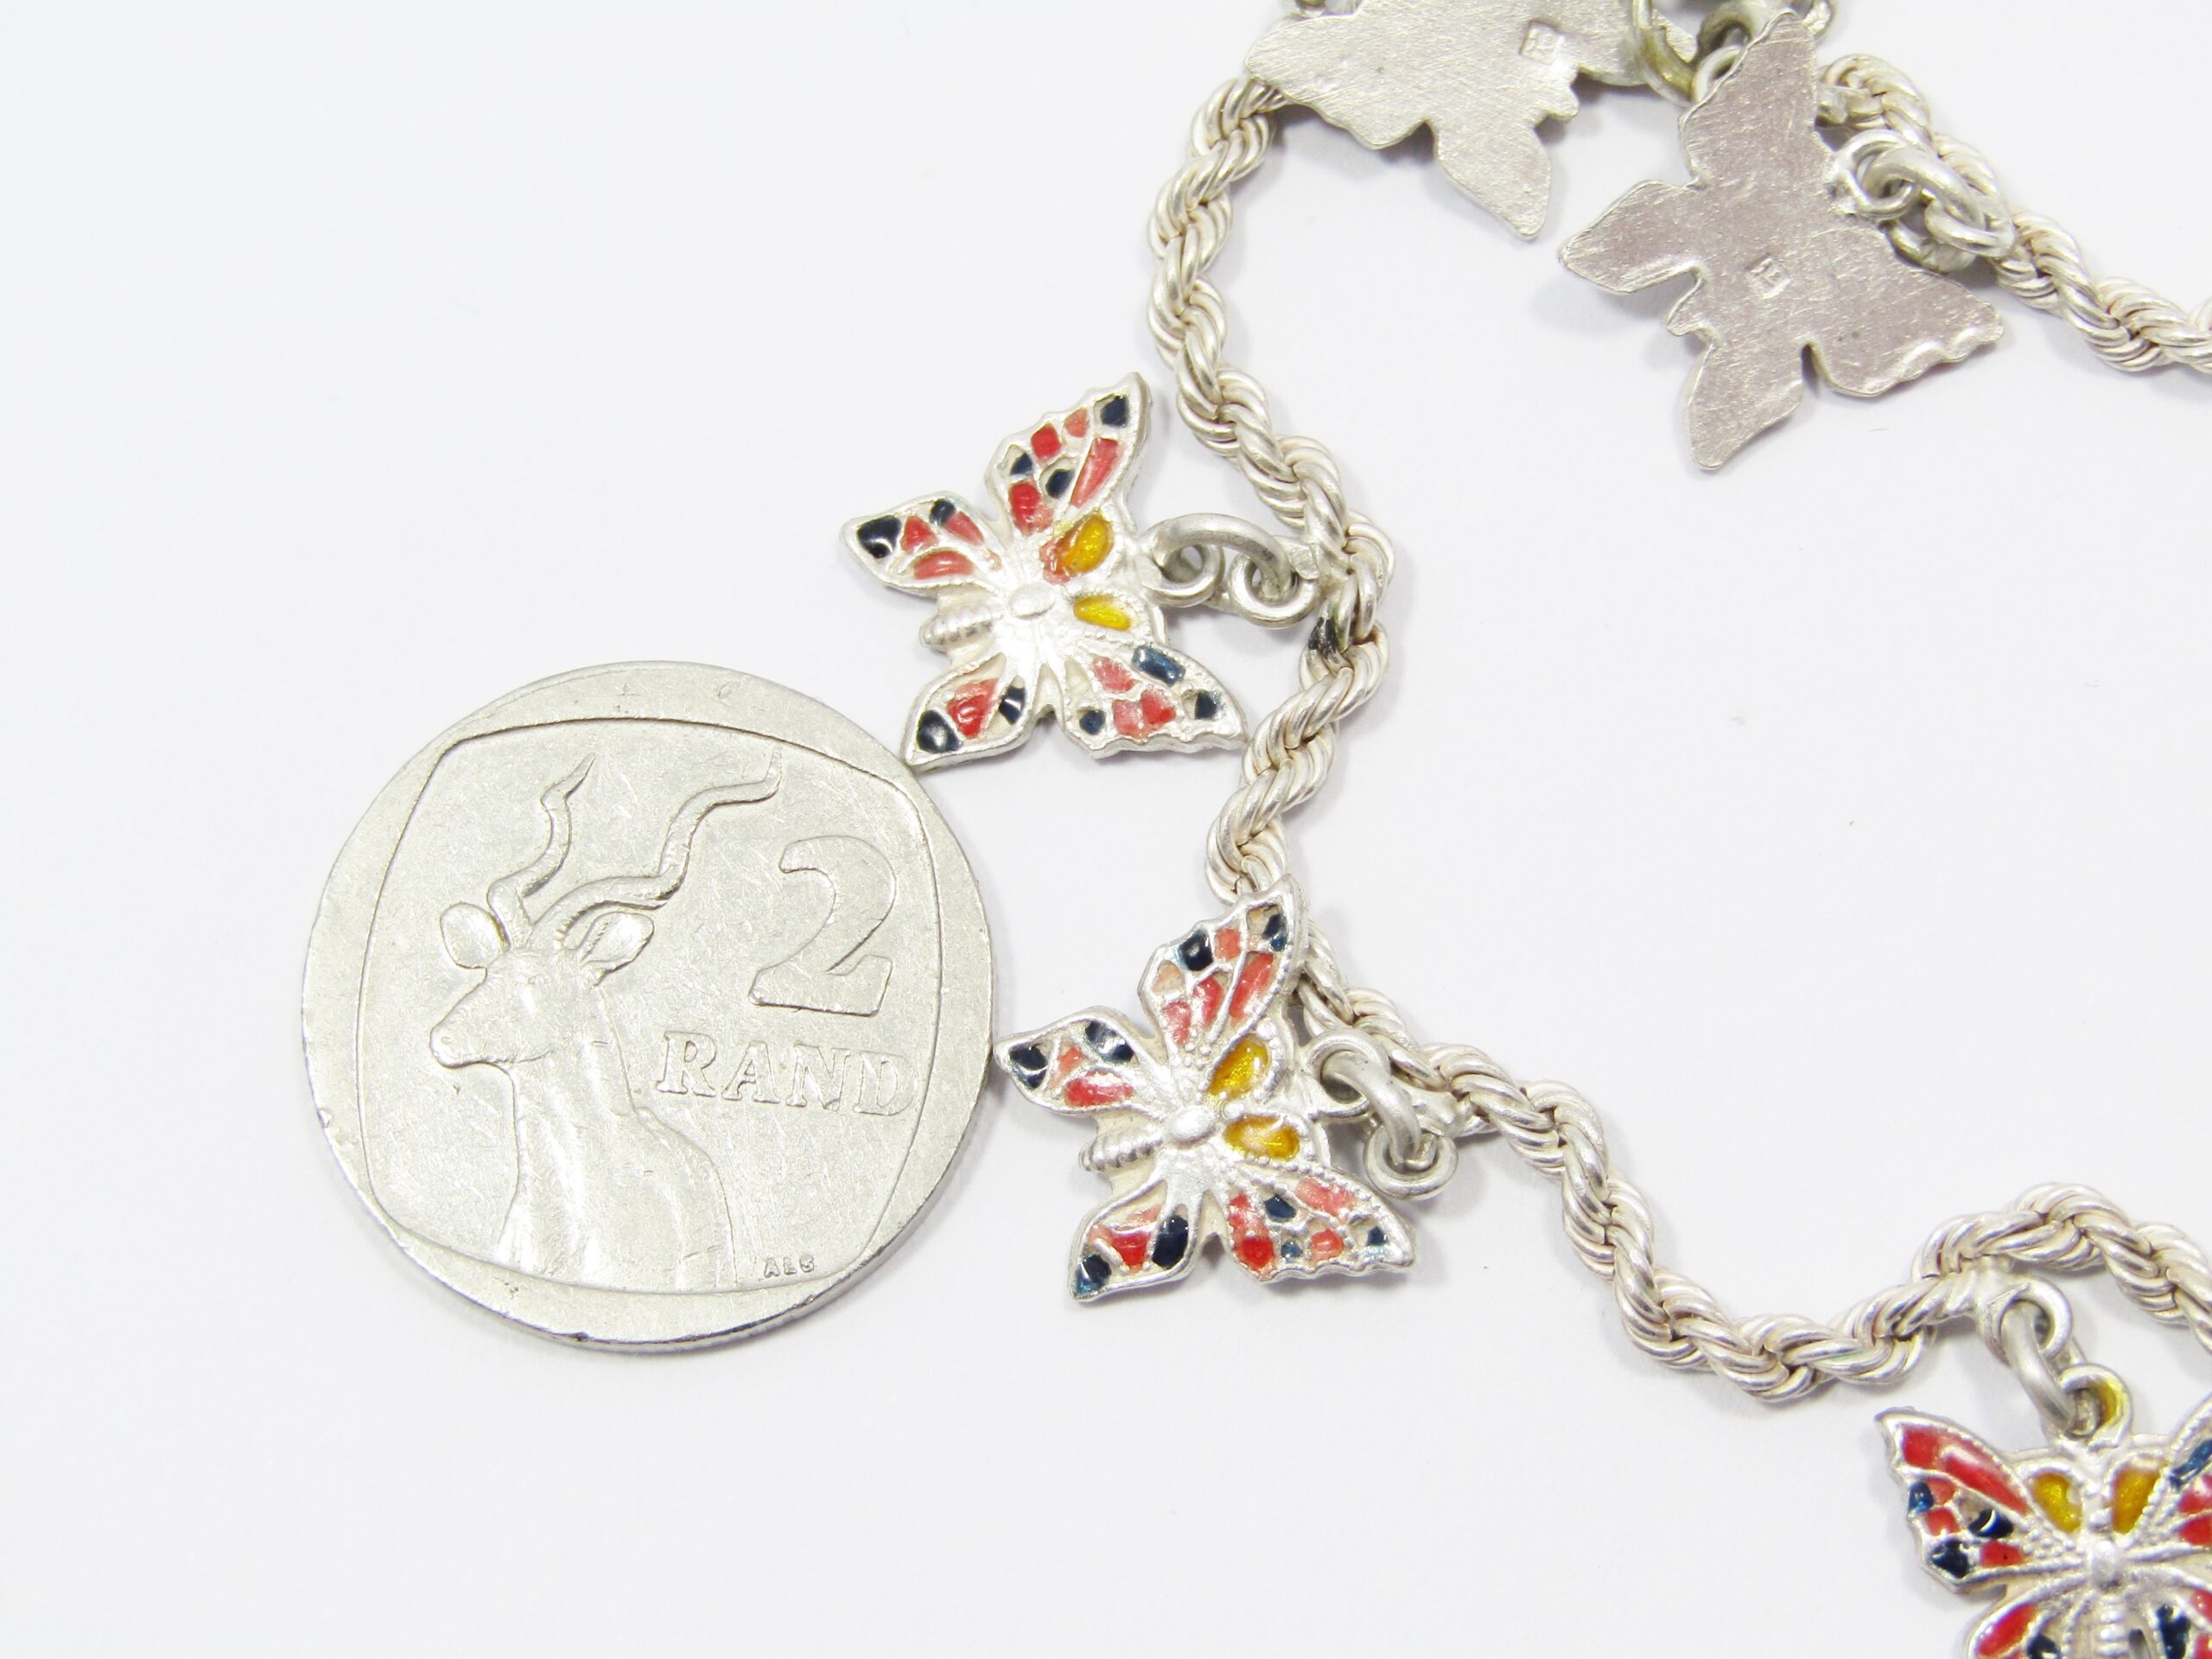 A Beautiful Enamel inlay Butterfly Charm Bracelet With Egyptian Hallmarks for 800 Silver